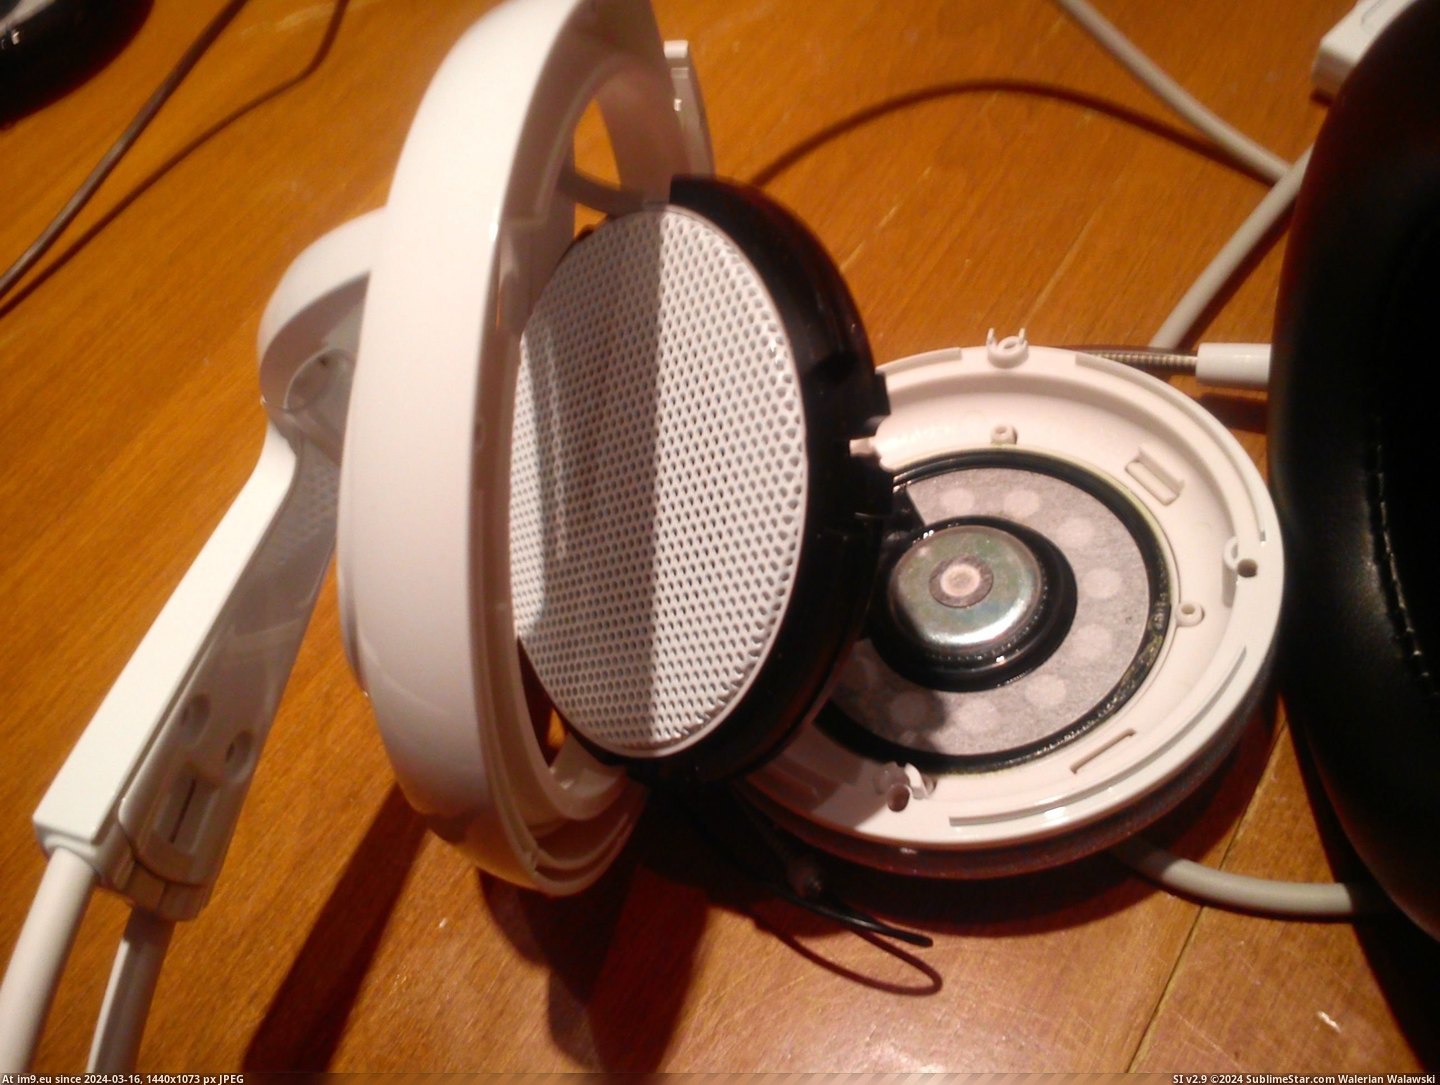 #Gaming #Headset #Modified [Gaming] I modified my headset. 3 Pic. (Image of album My r/GAMING favs))